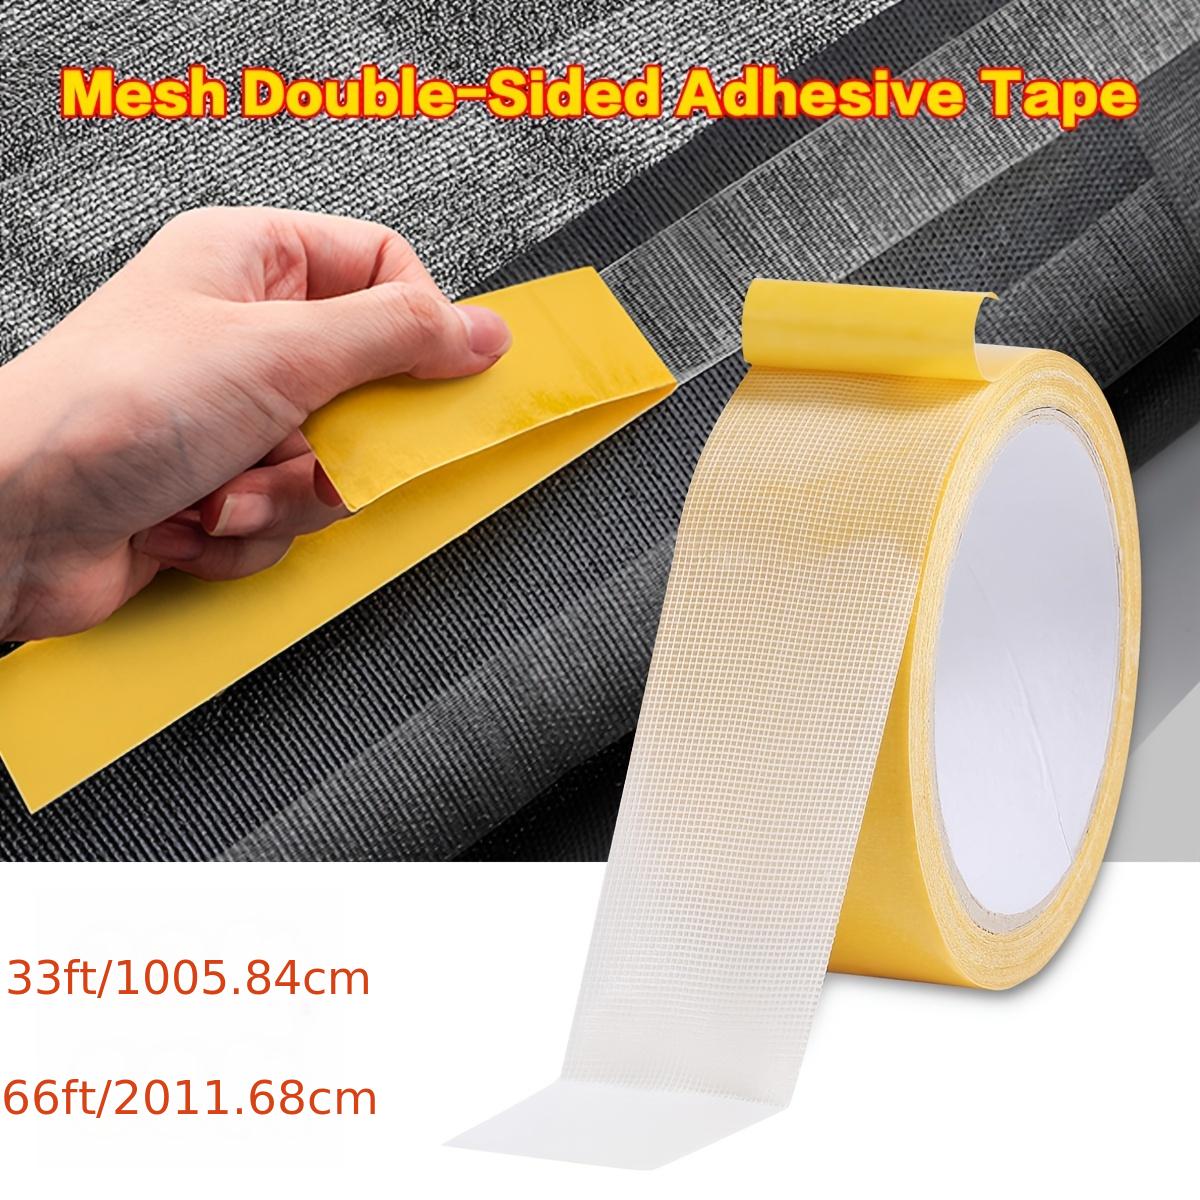 High Adhesive Strength Mesh Double-Sided Duct Tape, Carpet Tape Double Sided, Easily Removable with No Residue, Keeps Rugs in Place on Hardwood Tile (